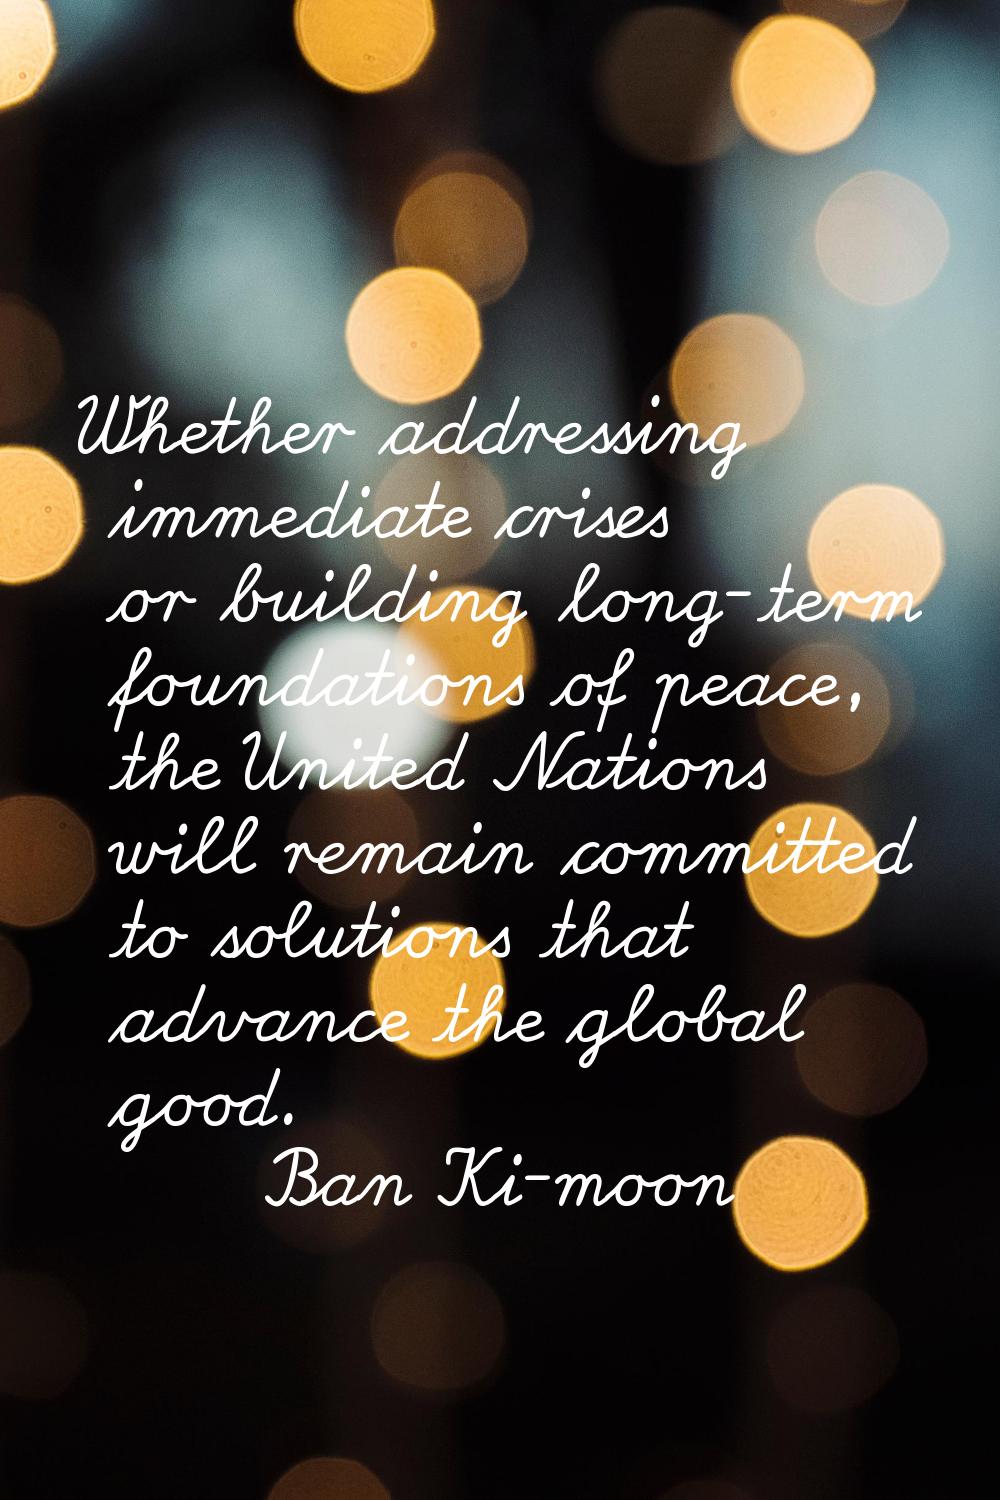 Whether addressing immediate crises or building long-term foundations of peace, the United Nations 